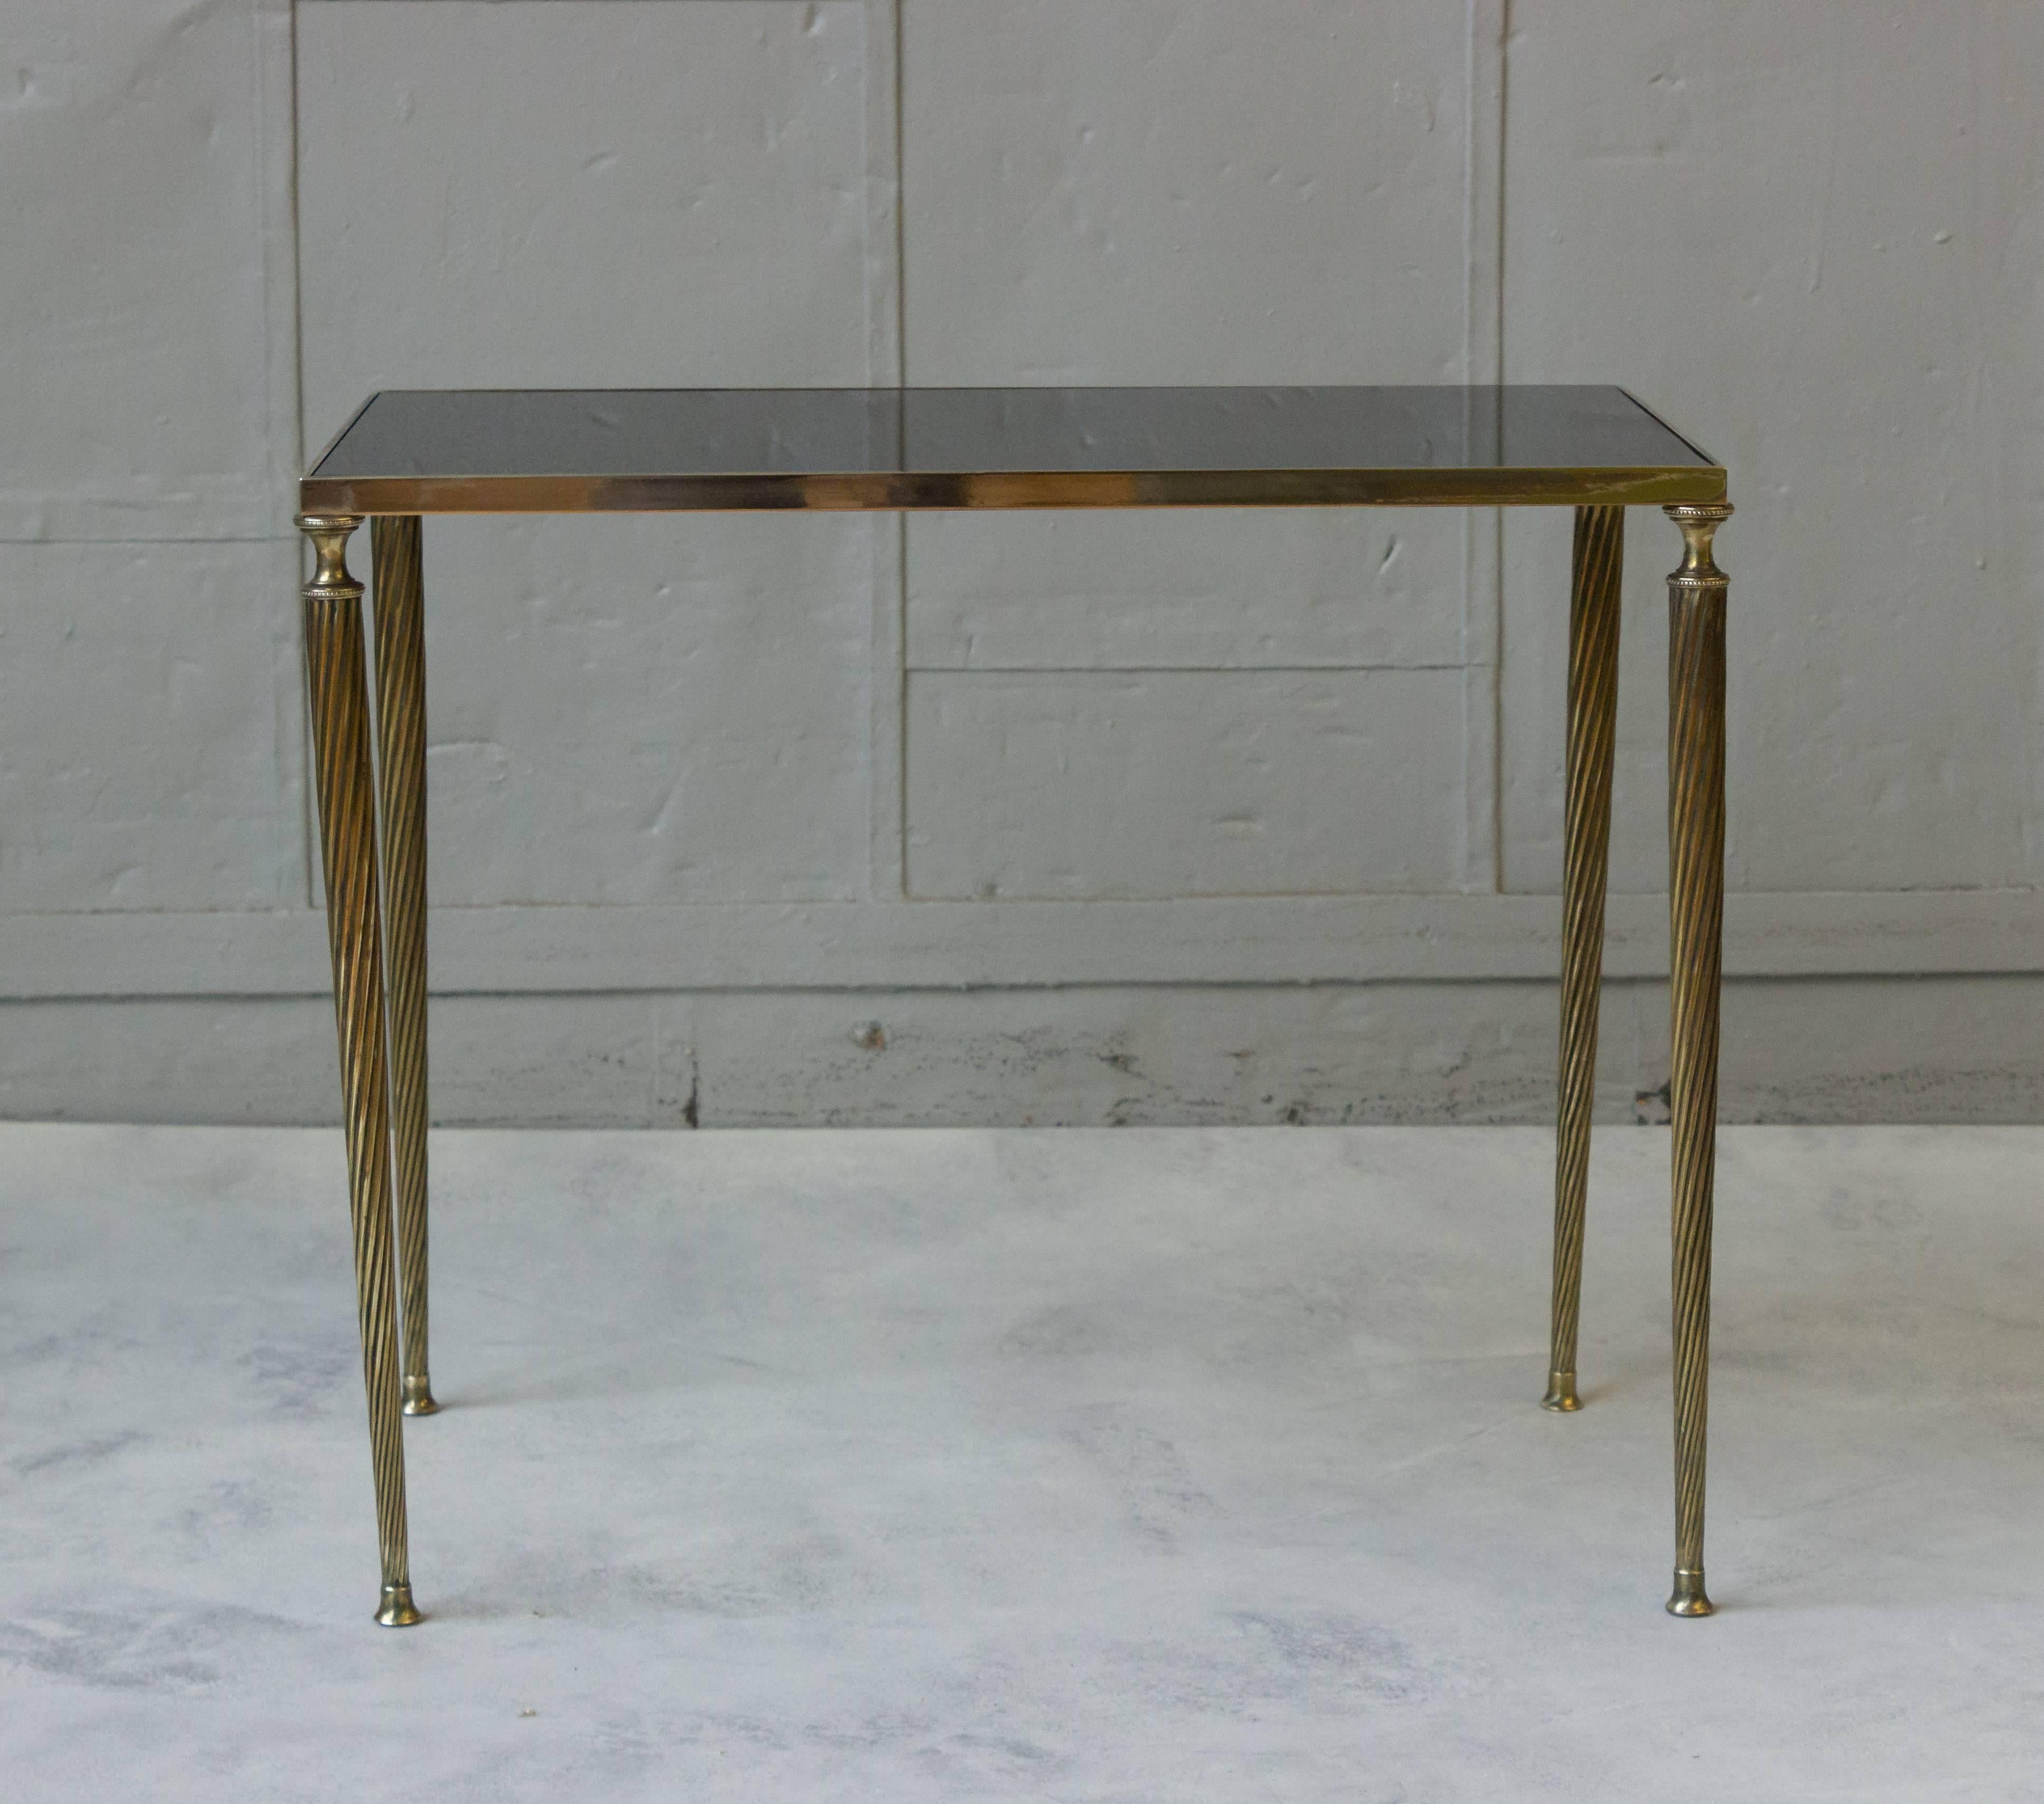 Set of three nesting tables with spiral turned brass legs and brass frames and black mirrored tops, French, 1940s in the style of Maison Jansen. The glass has been recently replaced.

 